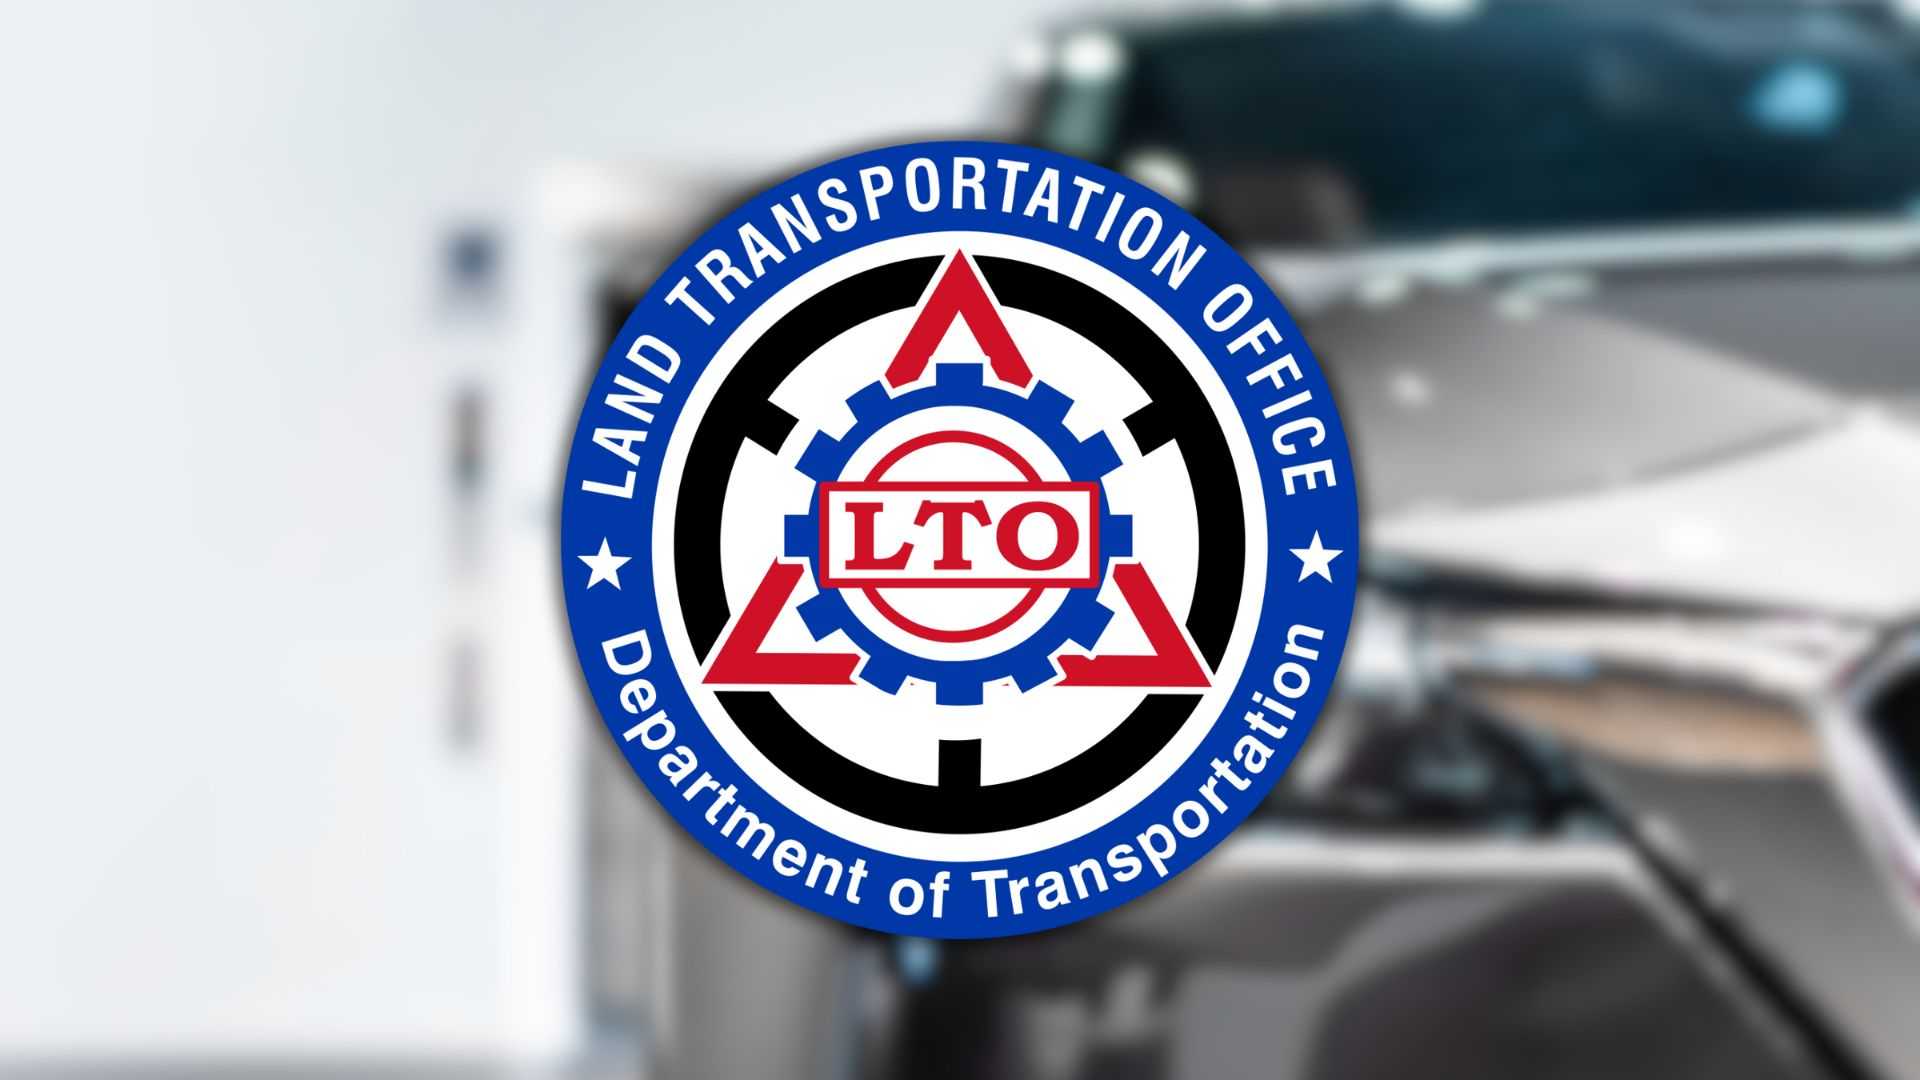 LTO suspends license of SUV driver in viral road rage incident